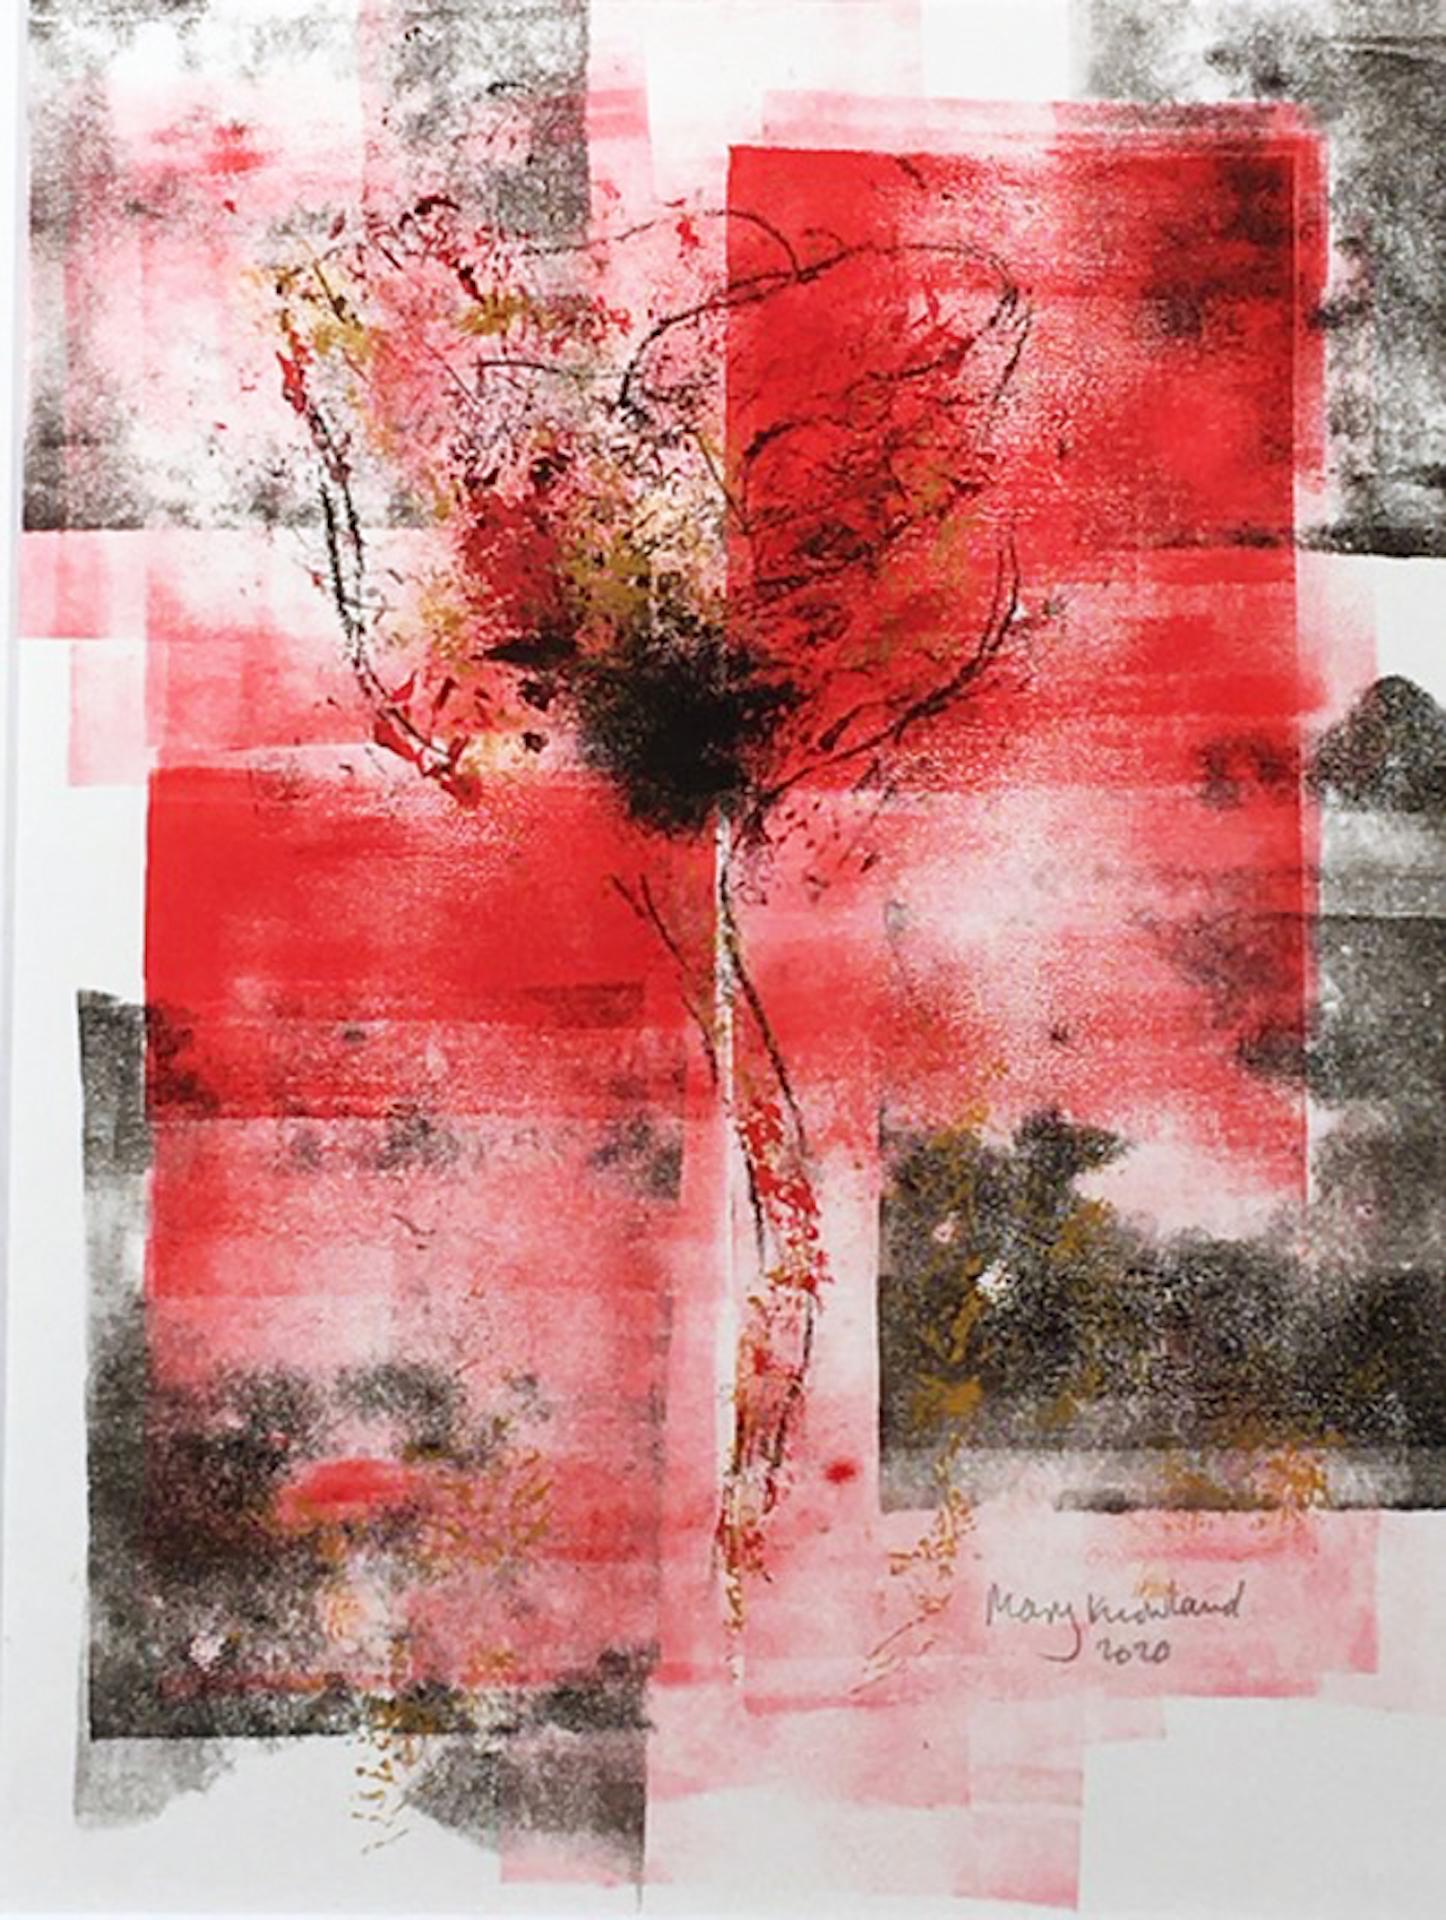 Mary Knowland
Poppy 17
Unique Mono Print
Paper size: H 28cm x W 22cm
Mount Size: H 45cm x W 37cm
Sold Unframed
Please note that insitu images are purely an indication of how a piece may look.

A symbolic flower, the Poppy expresses both the fullness